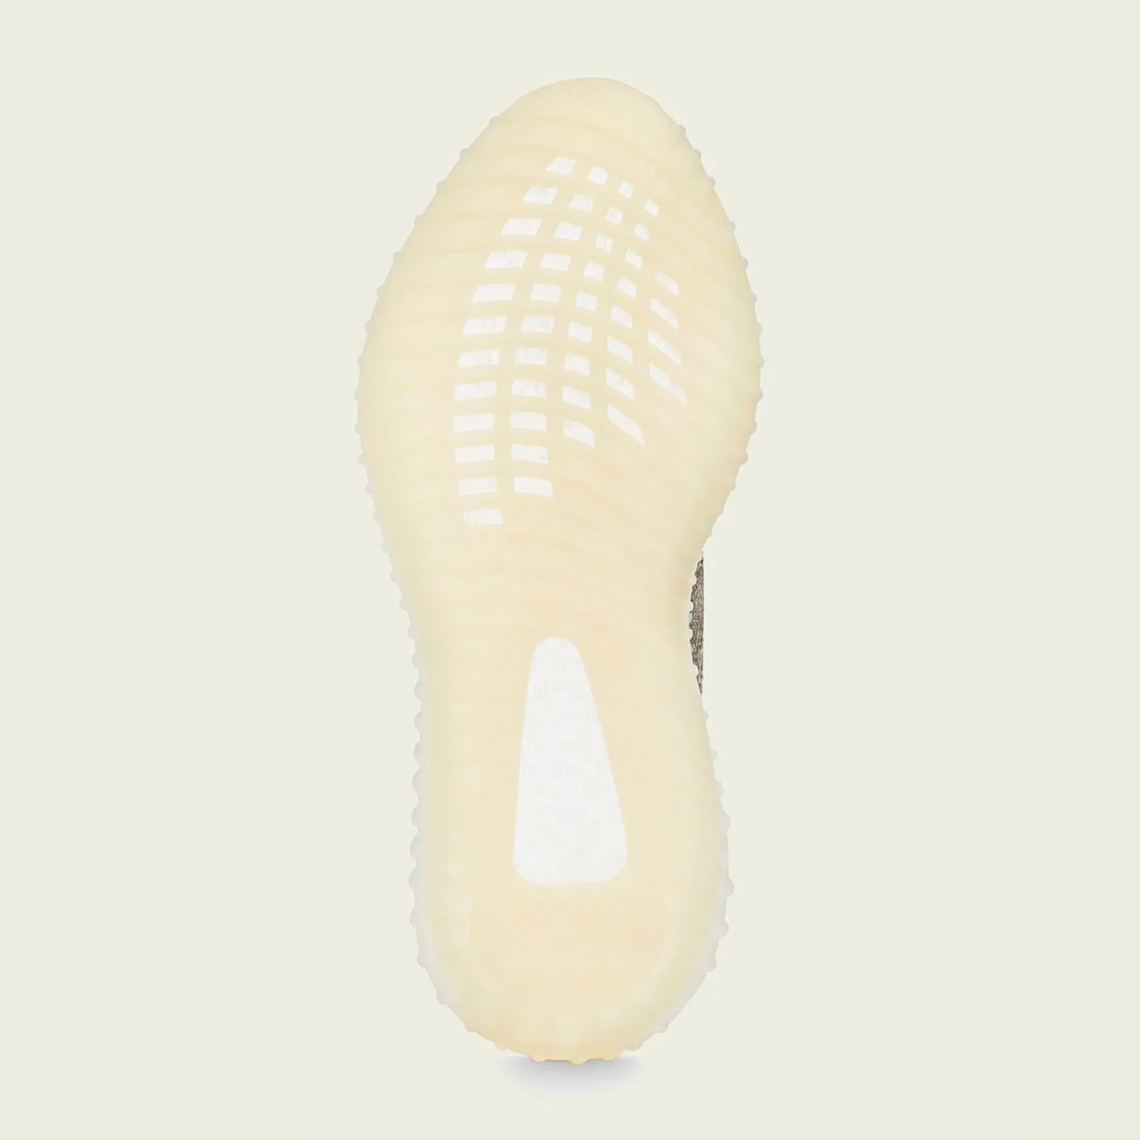 Adidas dragon Yeezy Boost 350 V2 Zyon Fz1267 Official Images 3